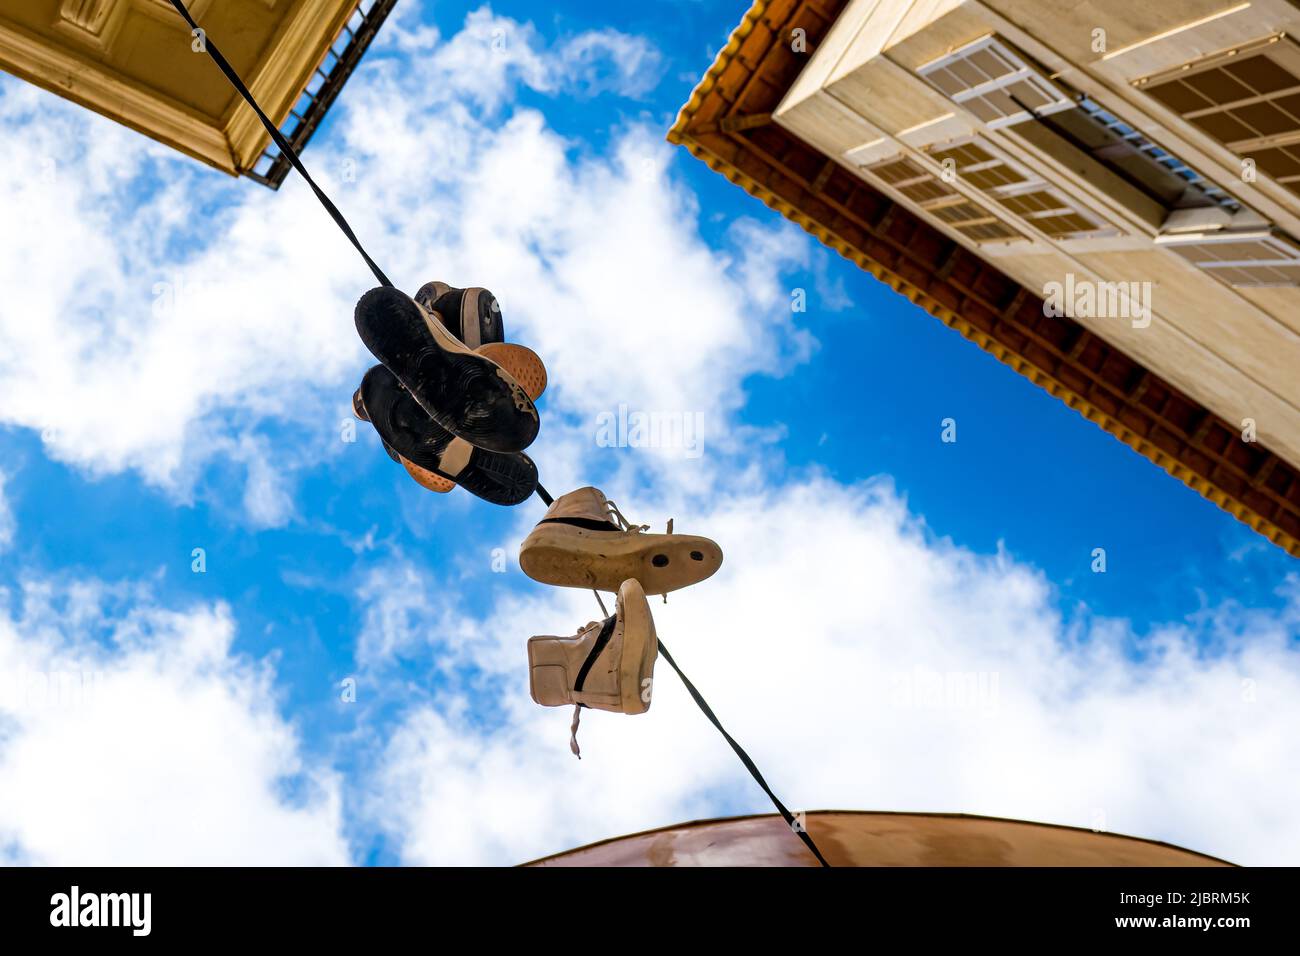 Old sneakers thrown over a telephone wire hanging down in urban environment as a symbol of commemorating a rite of passage or a way to bully someone. Stock Photo